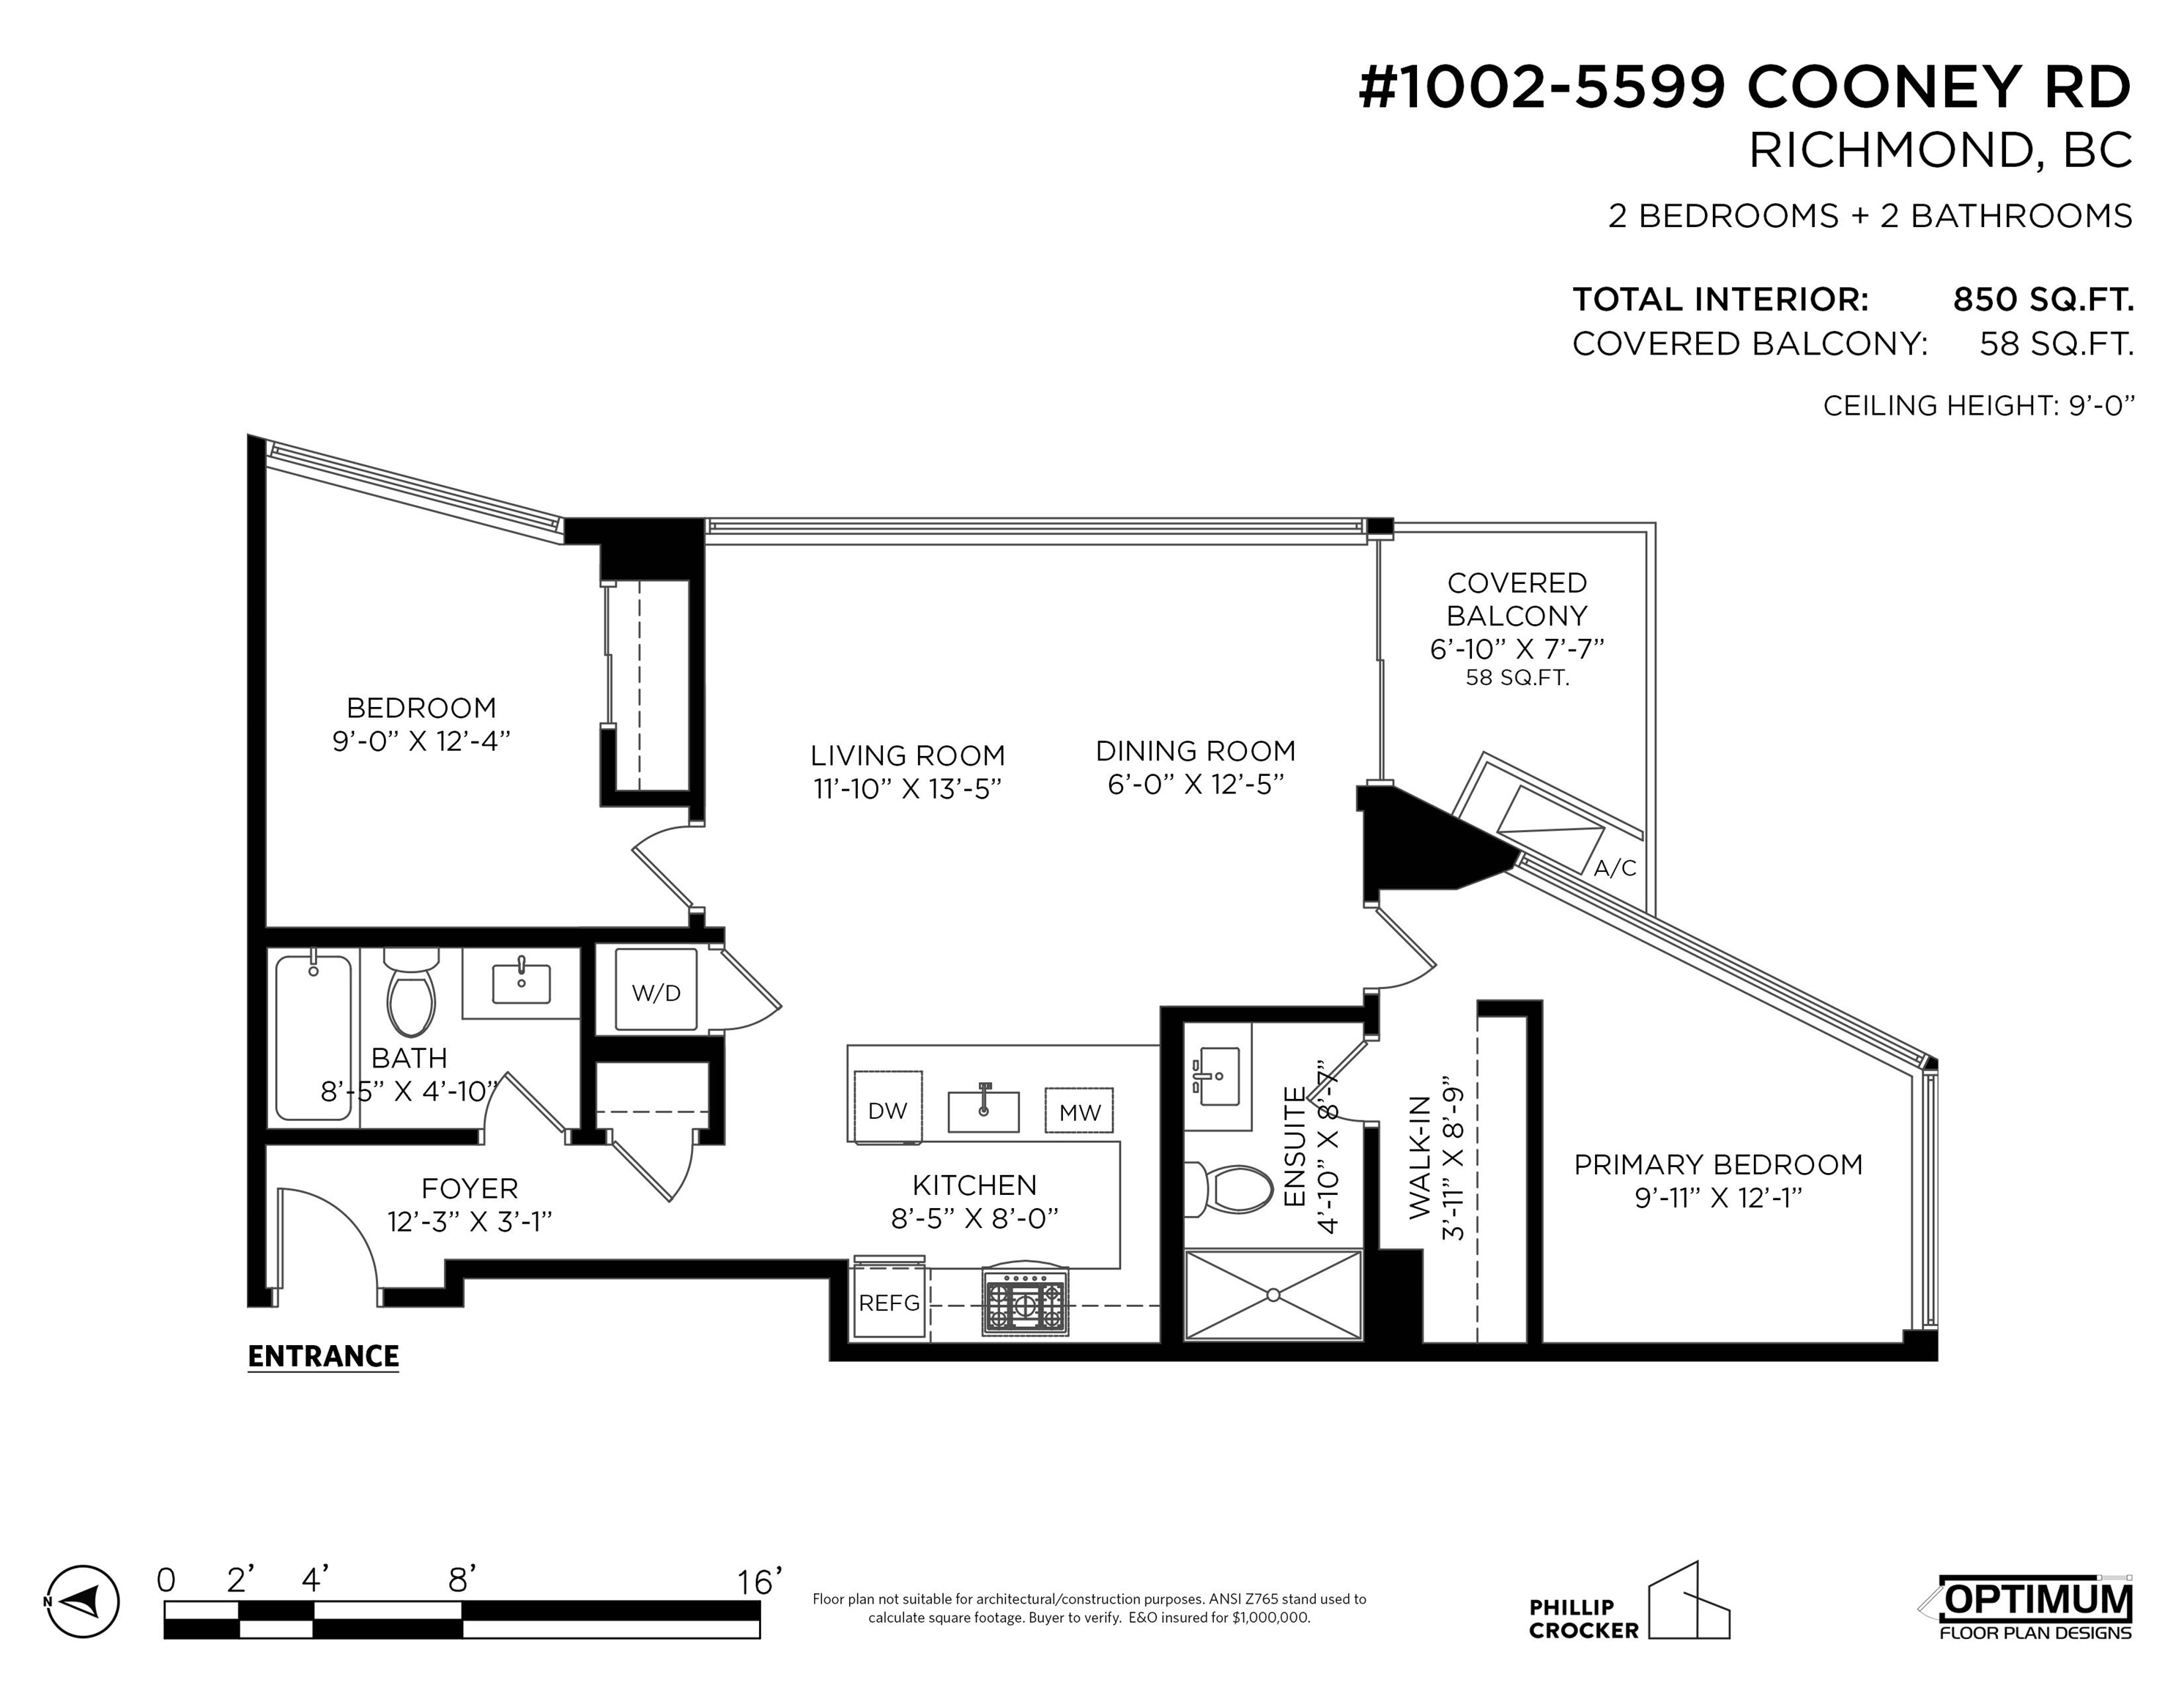 Listing image of 1002 5599 COONEY ROAD